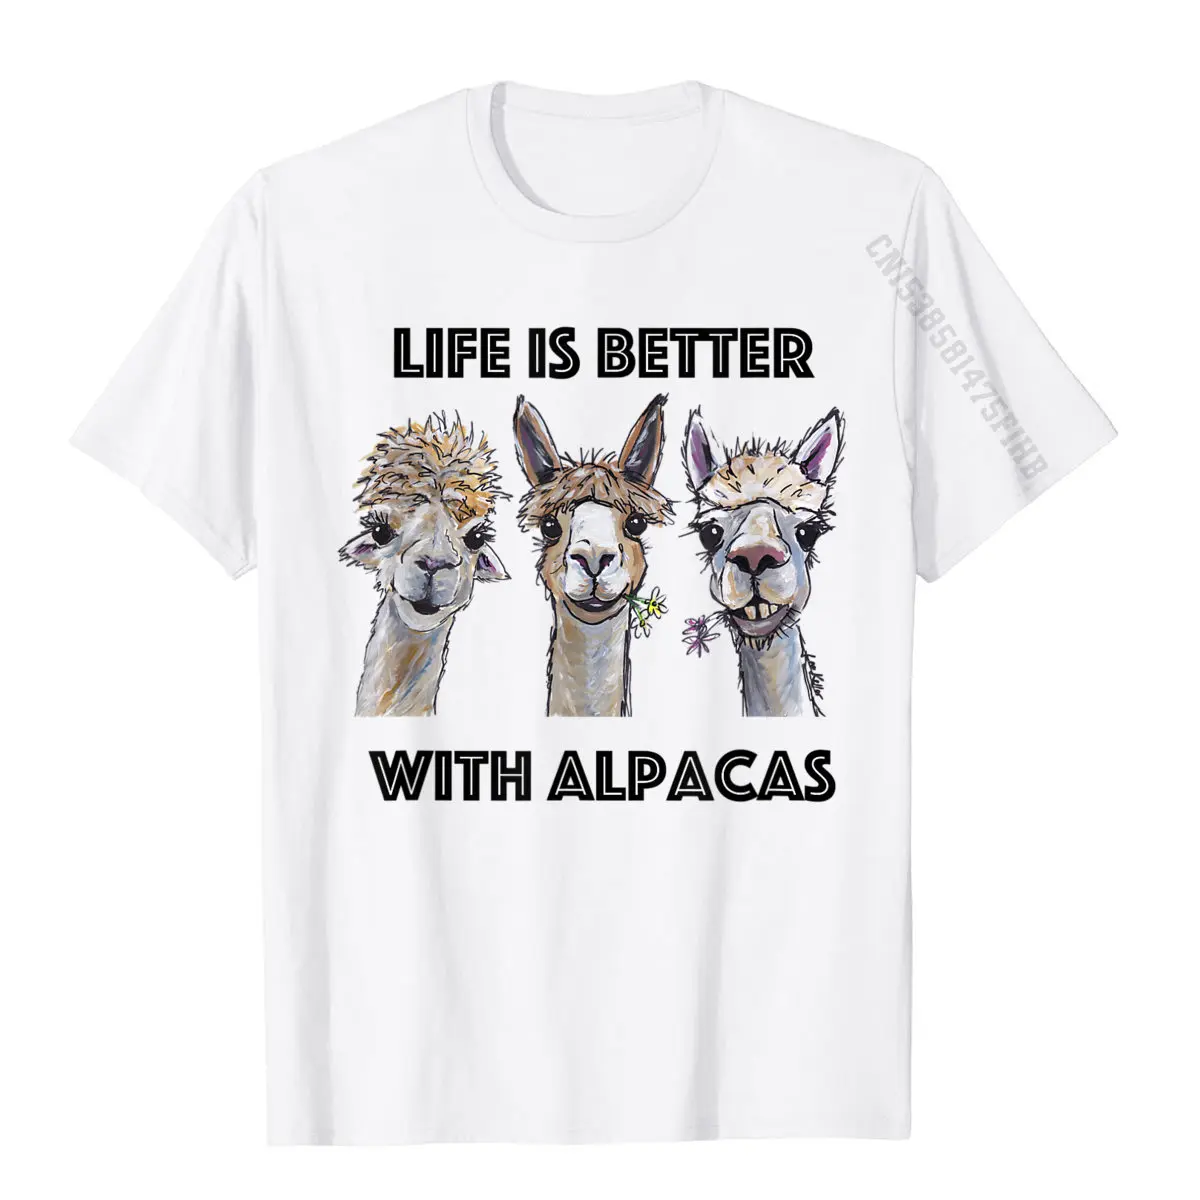 Life Is Better With Alpacas Shirt, Alpacas Lover T-Shirt Geek Tees For Men Oversized Cotton Tshirts Printed On